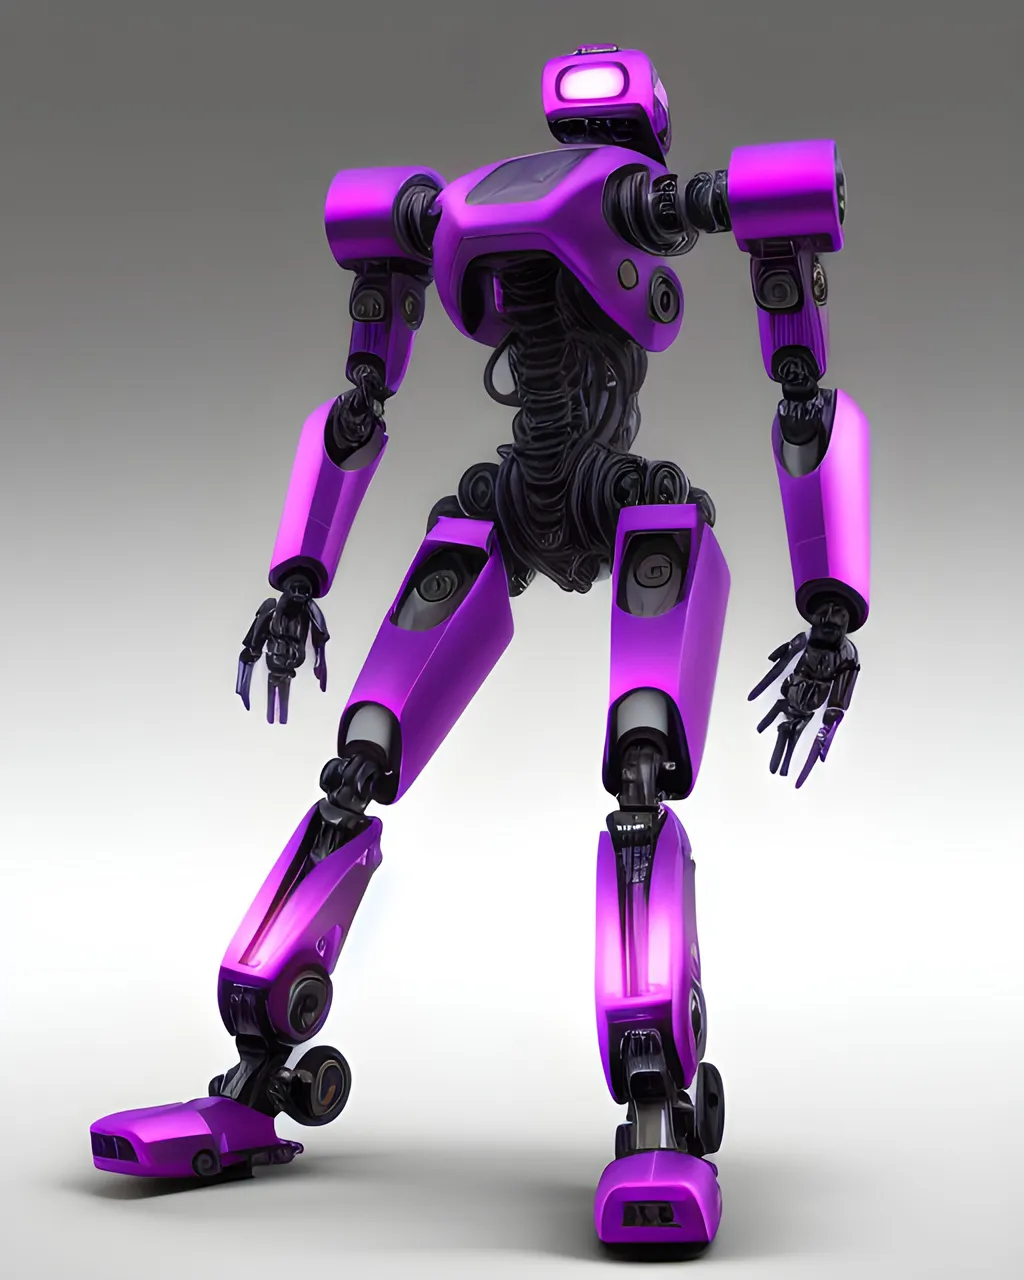 8x - Spider Robot Robotic Legs Purple Colored Skin (1).png